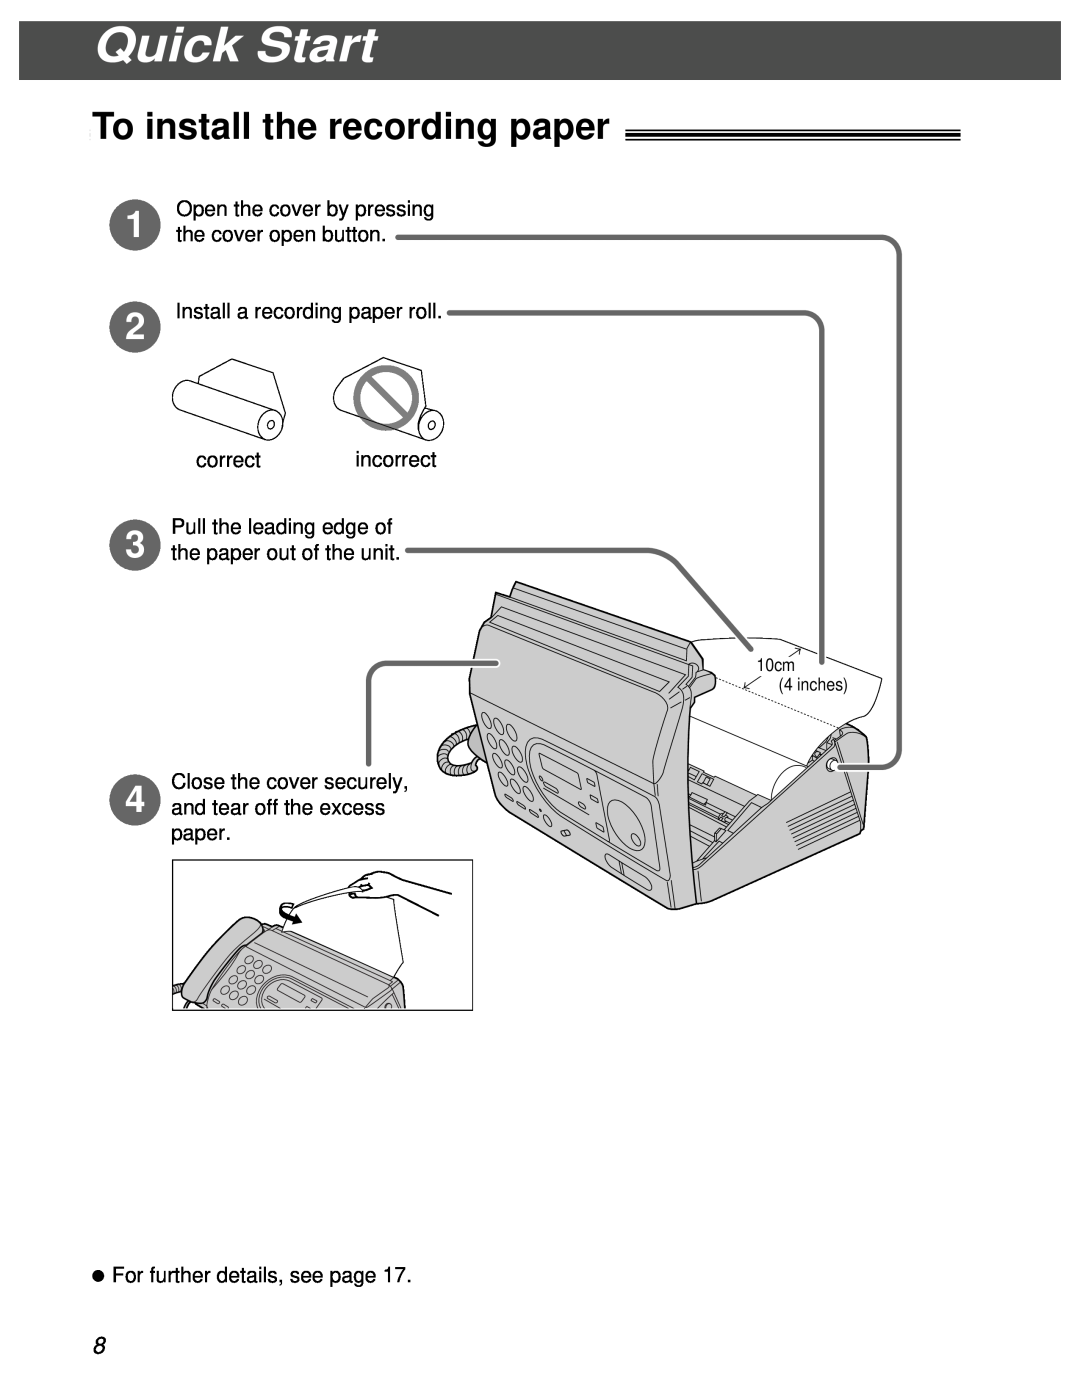 Panasonic KX-FT31BX To install the recording paper, Open the cover by pressing, the cover open button, incorrect 